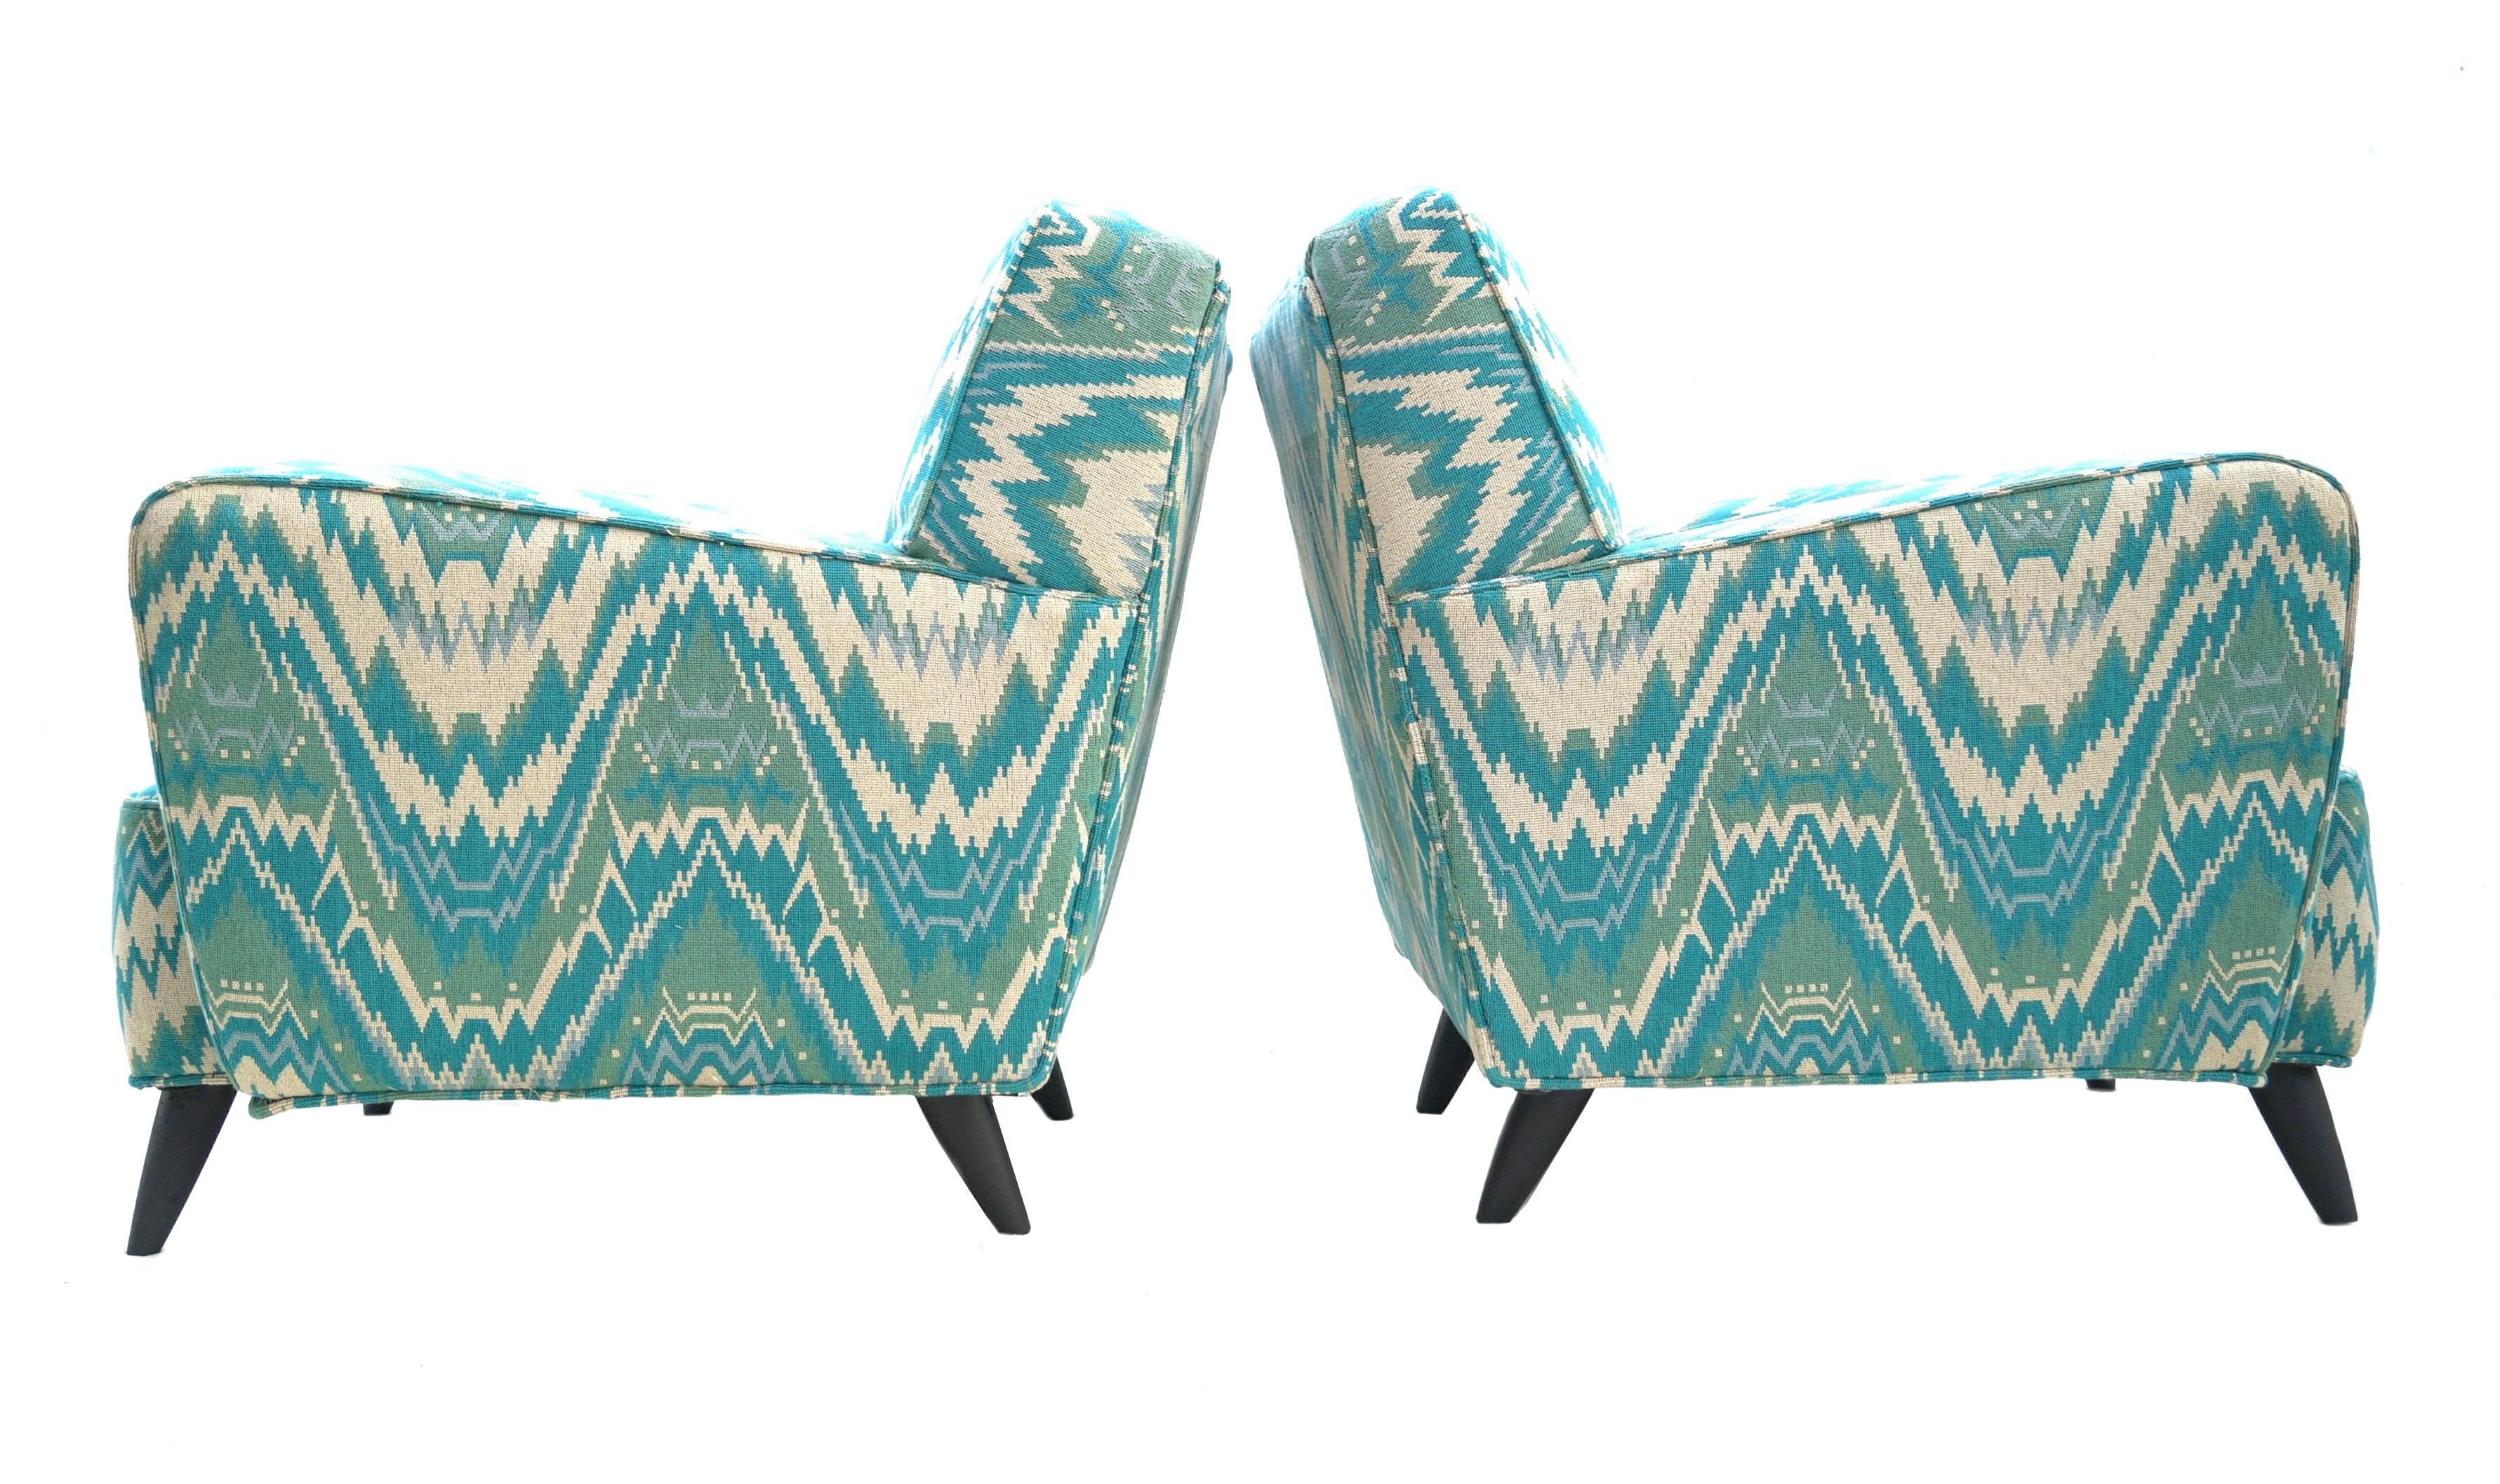 Pair of Mid-Century Modern Manner of Adrian Pearsall Sculptural Lounge Chairs For Sale 2